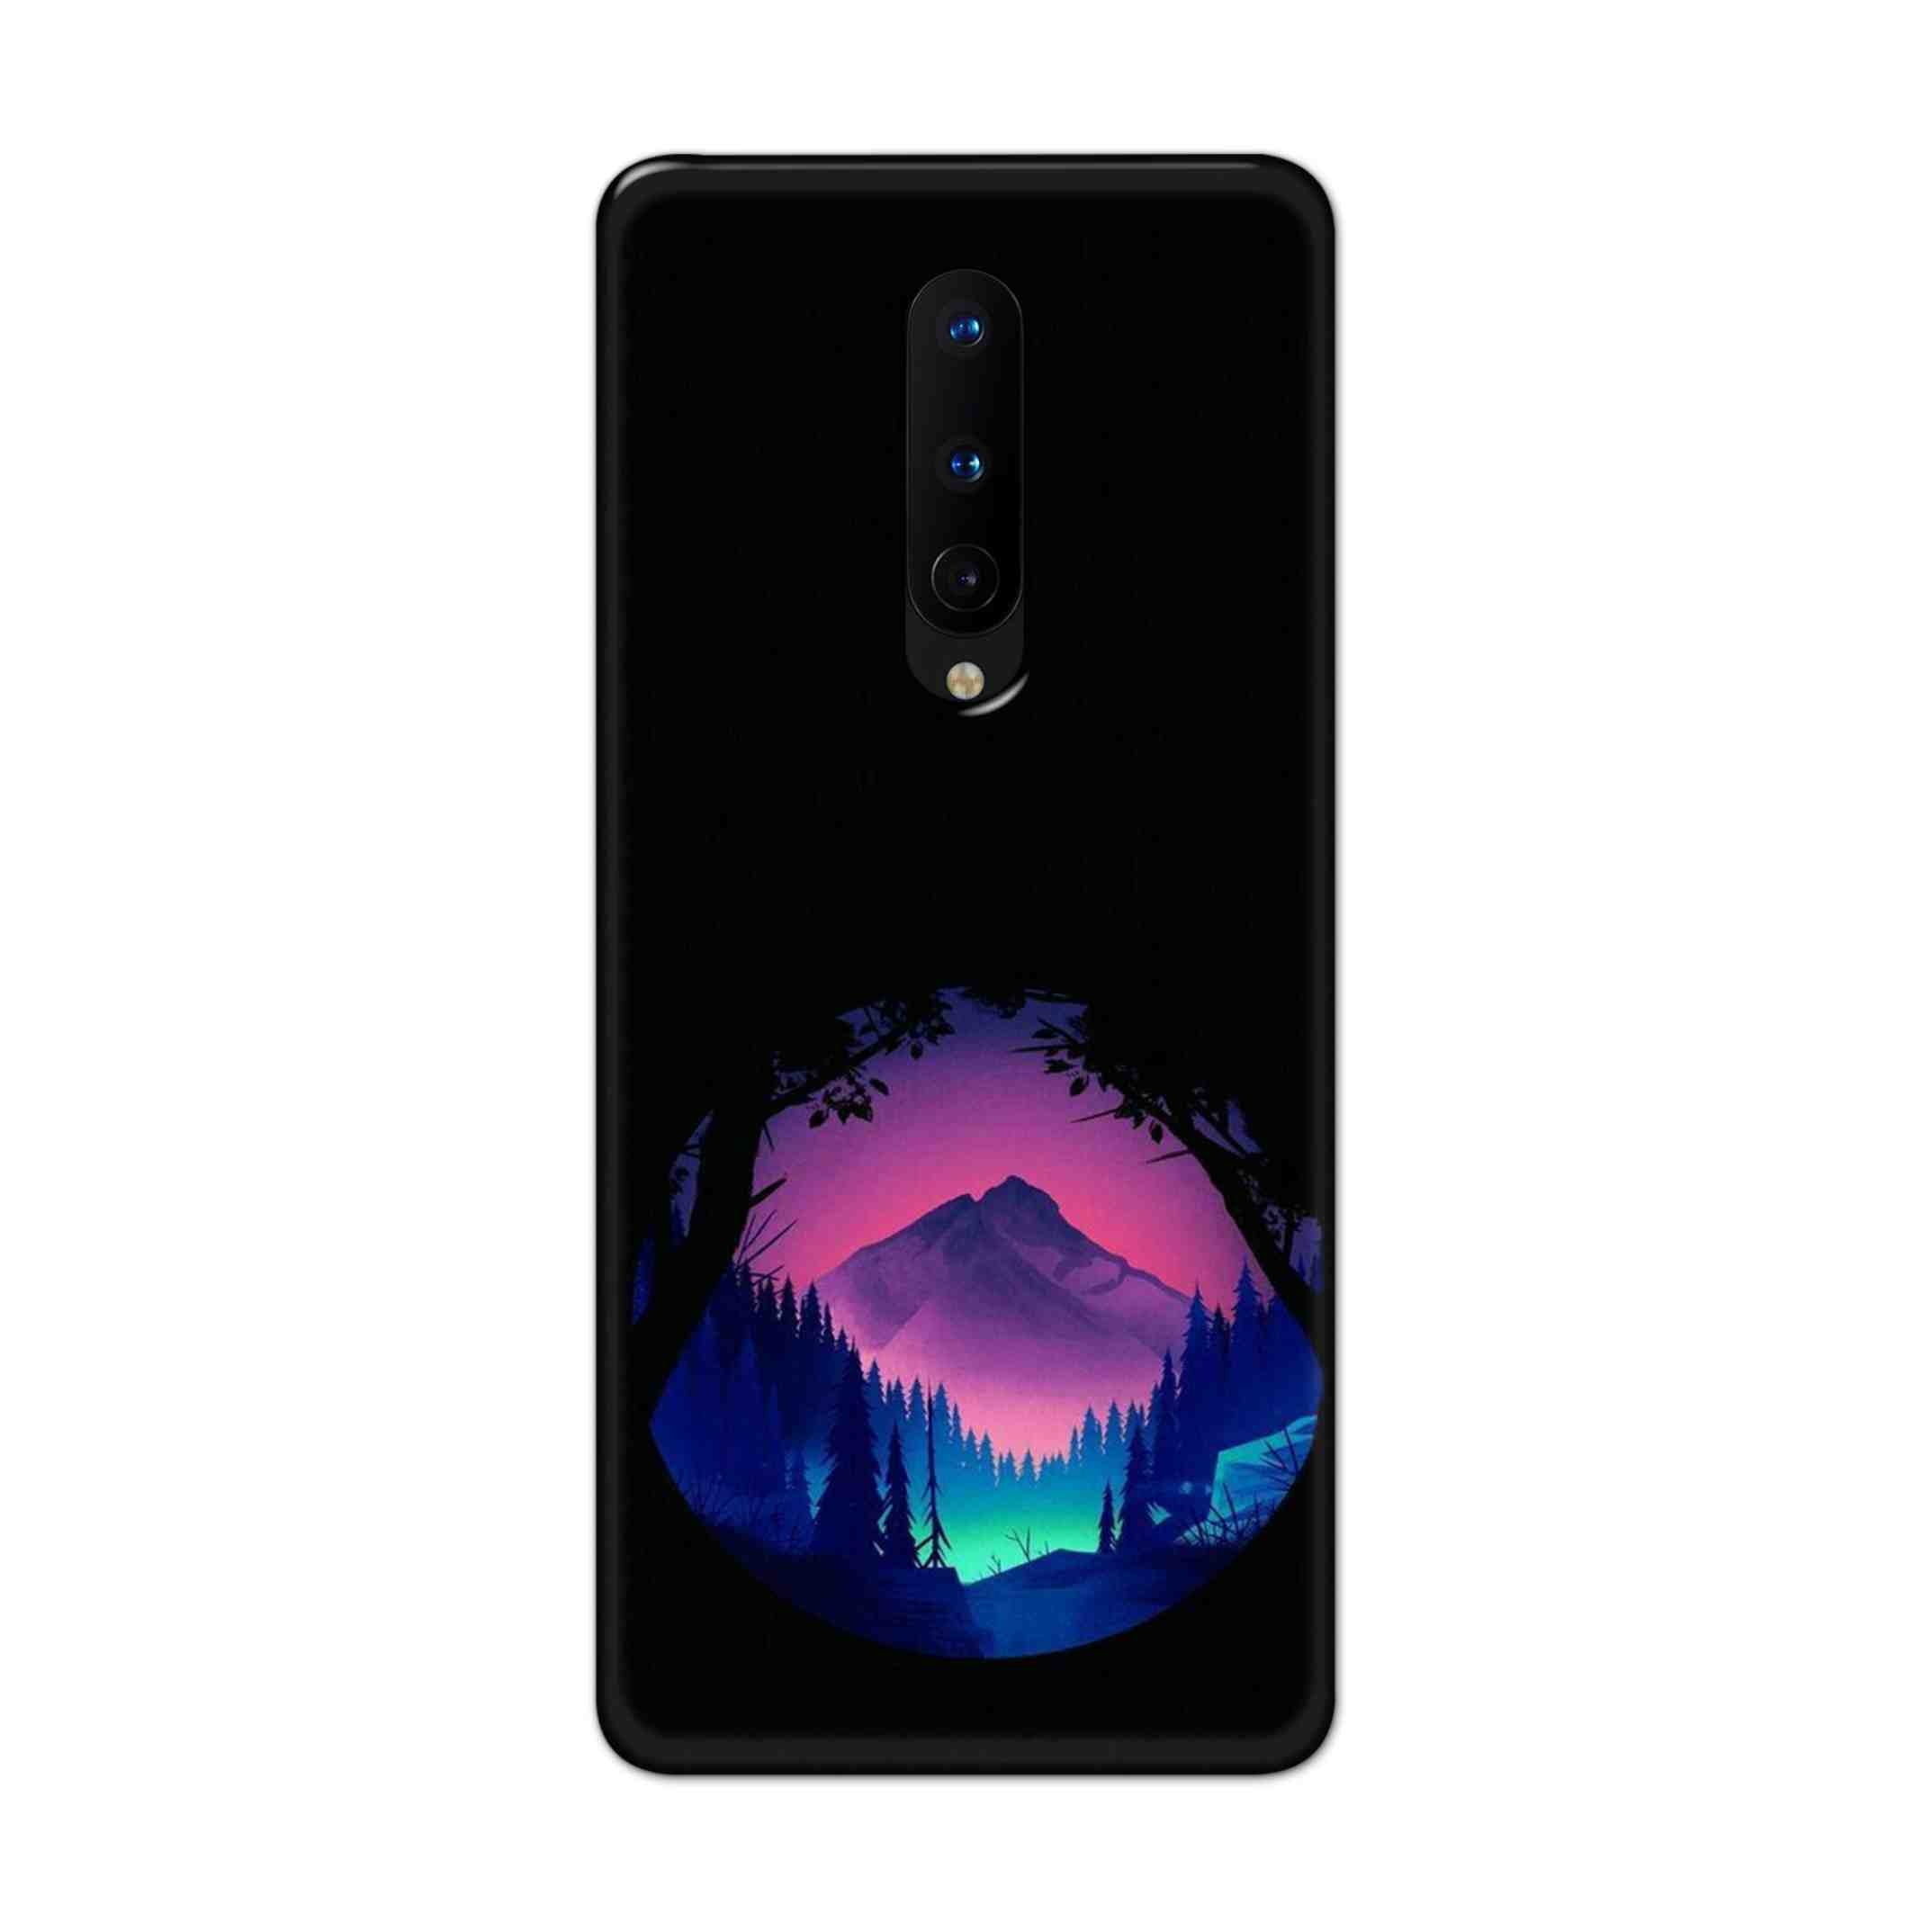 Buy Neon Tables Hard Back Mobile Phone Case Cover For OnePlus 8 Online